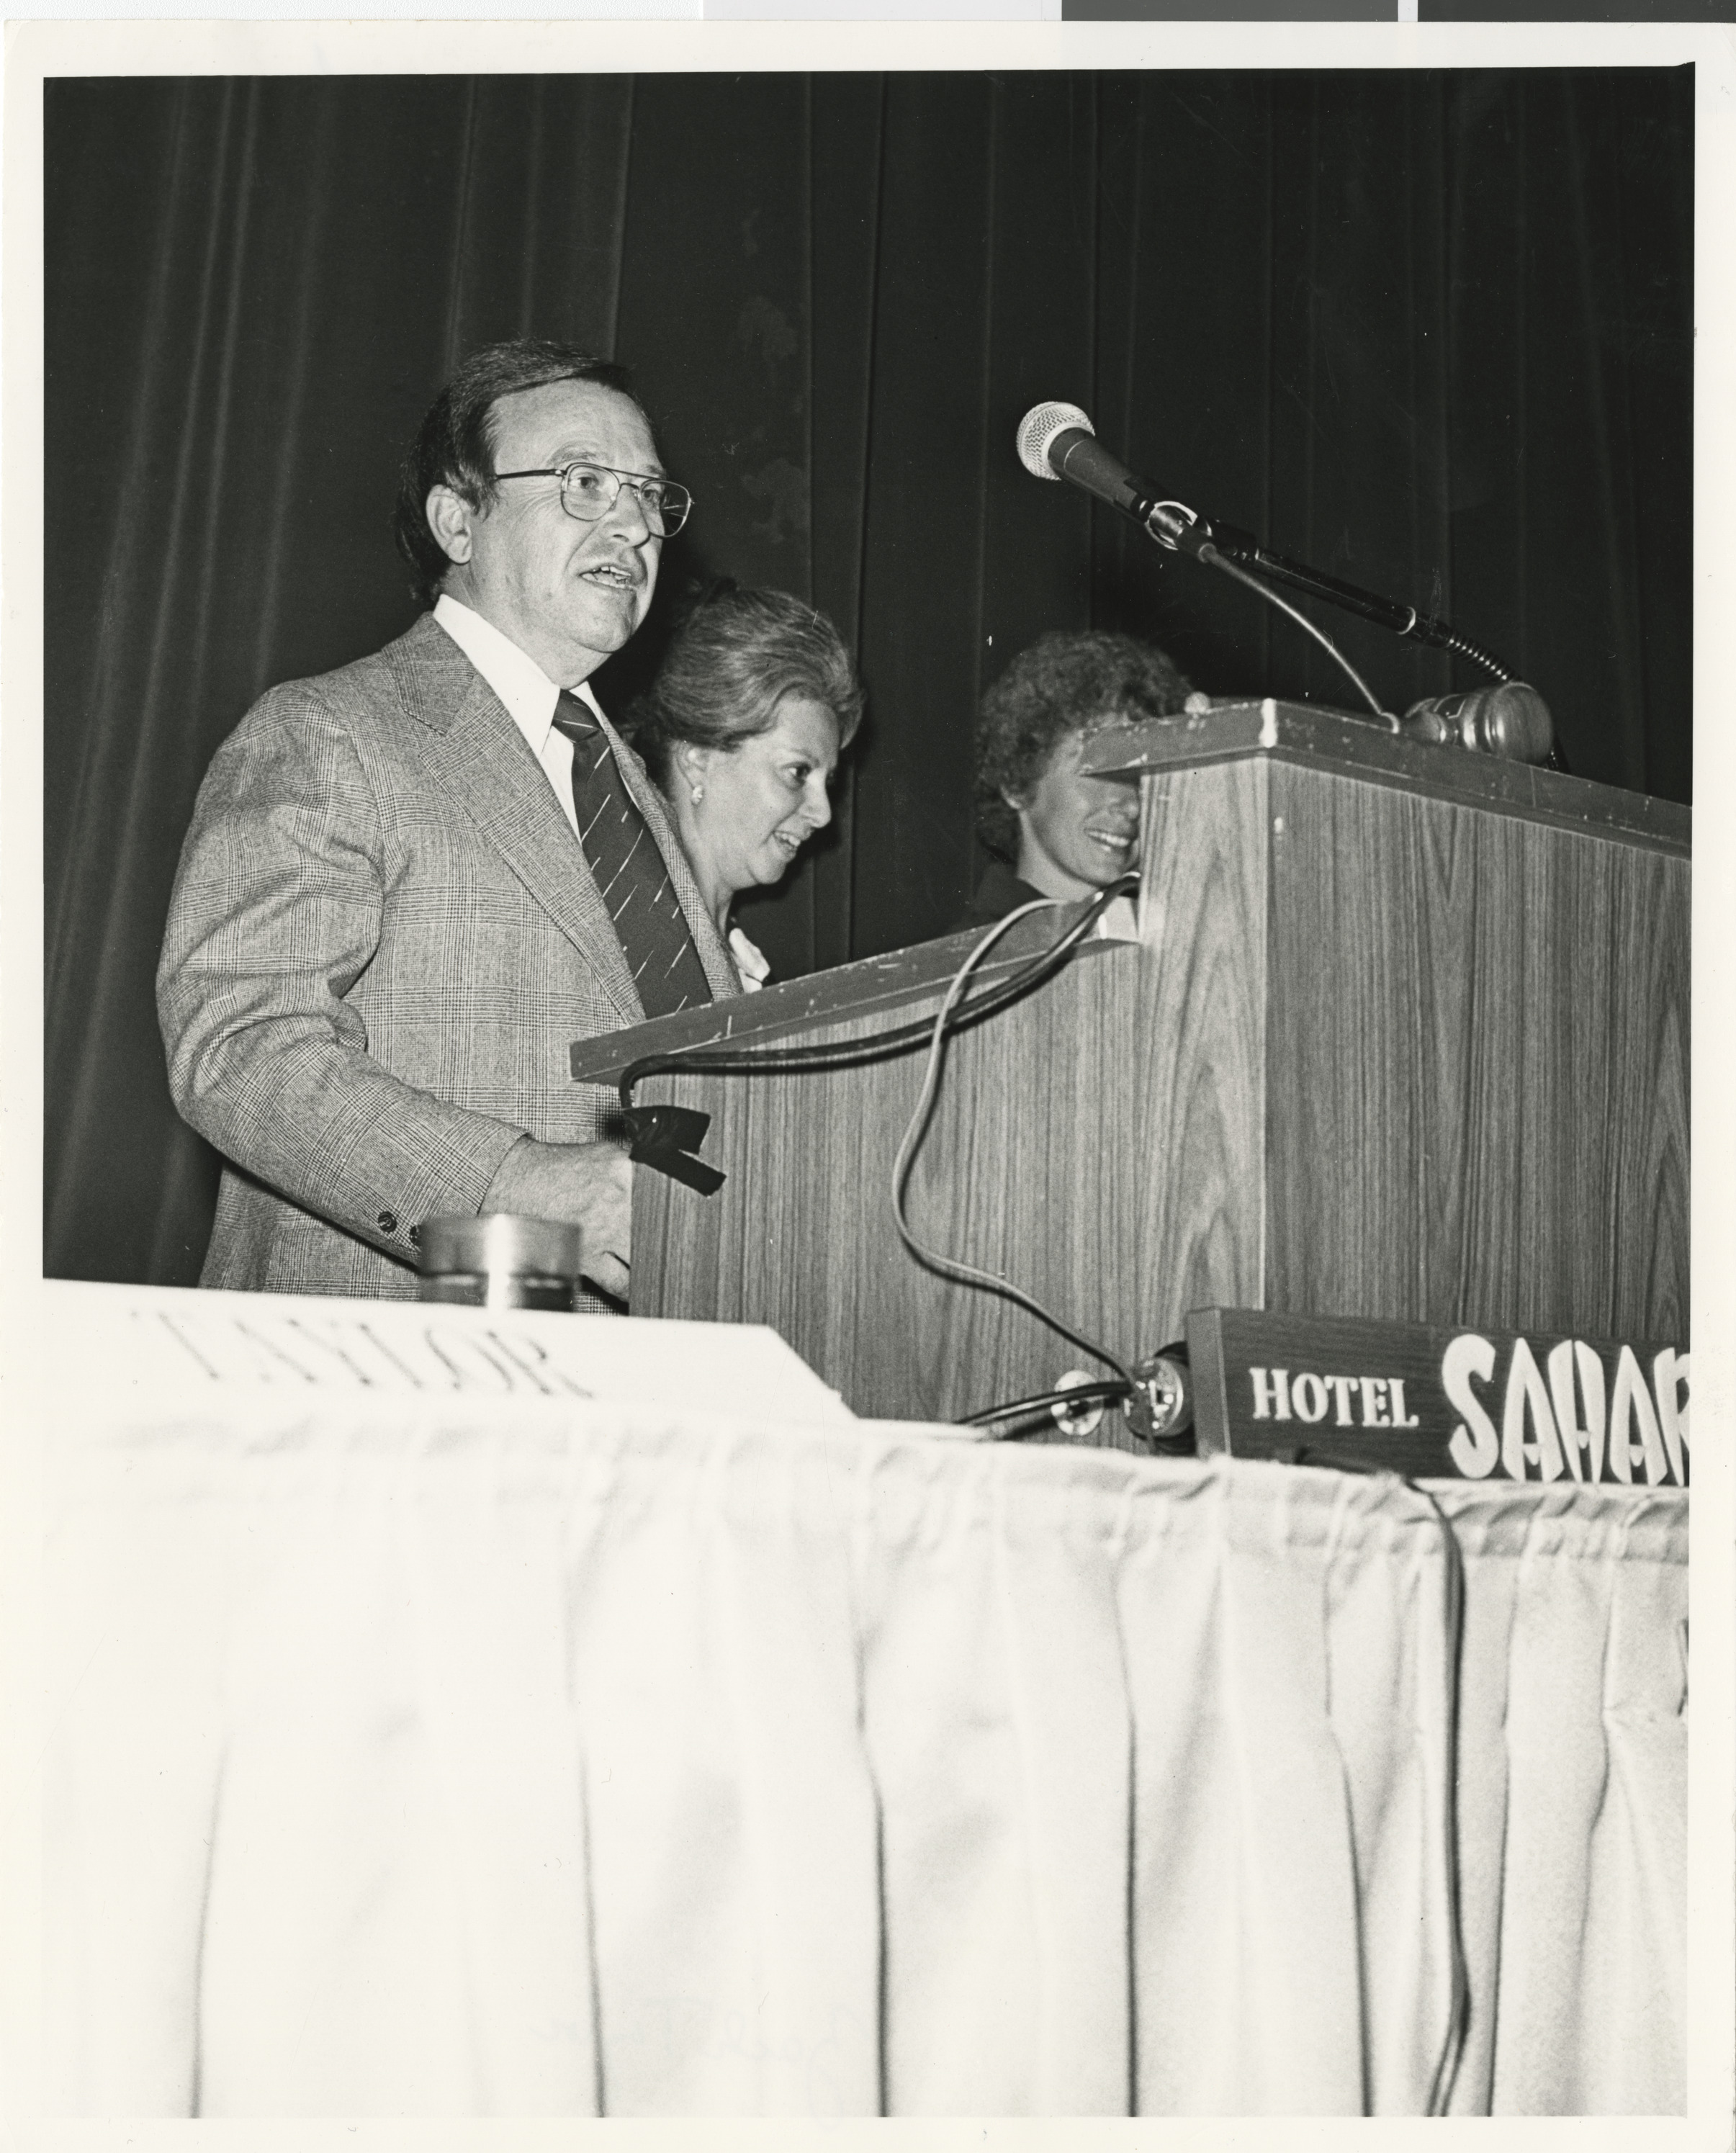 Photograph from Dorothy Eisenberg papers, 1970-1991